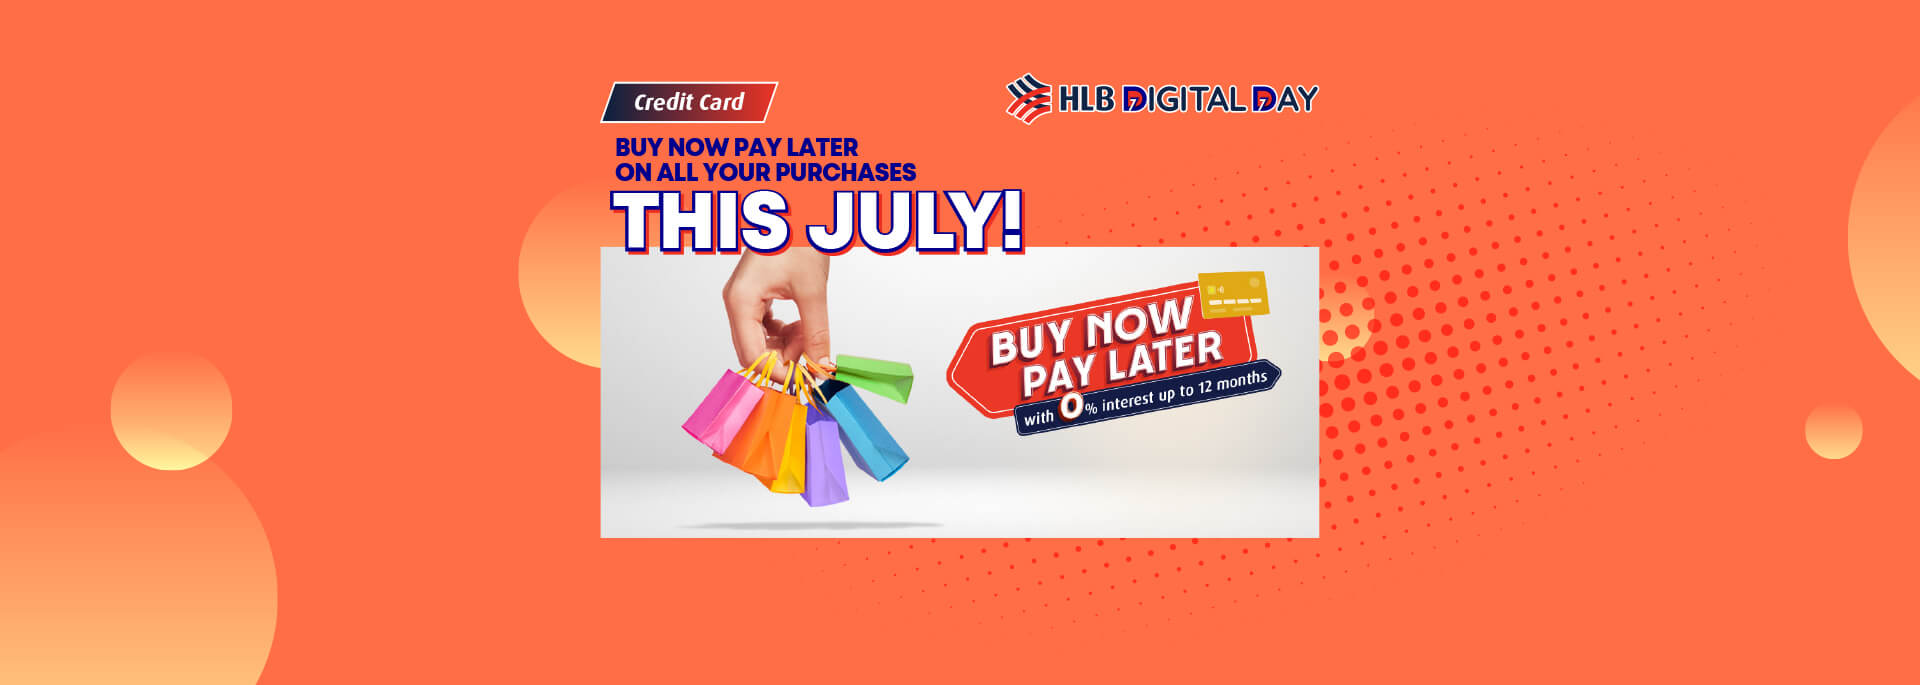 Buy Now Pay Later on all your purchases this July!